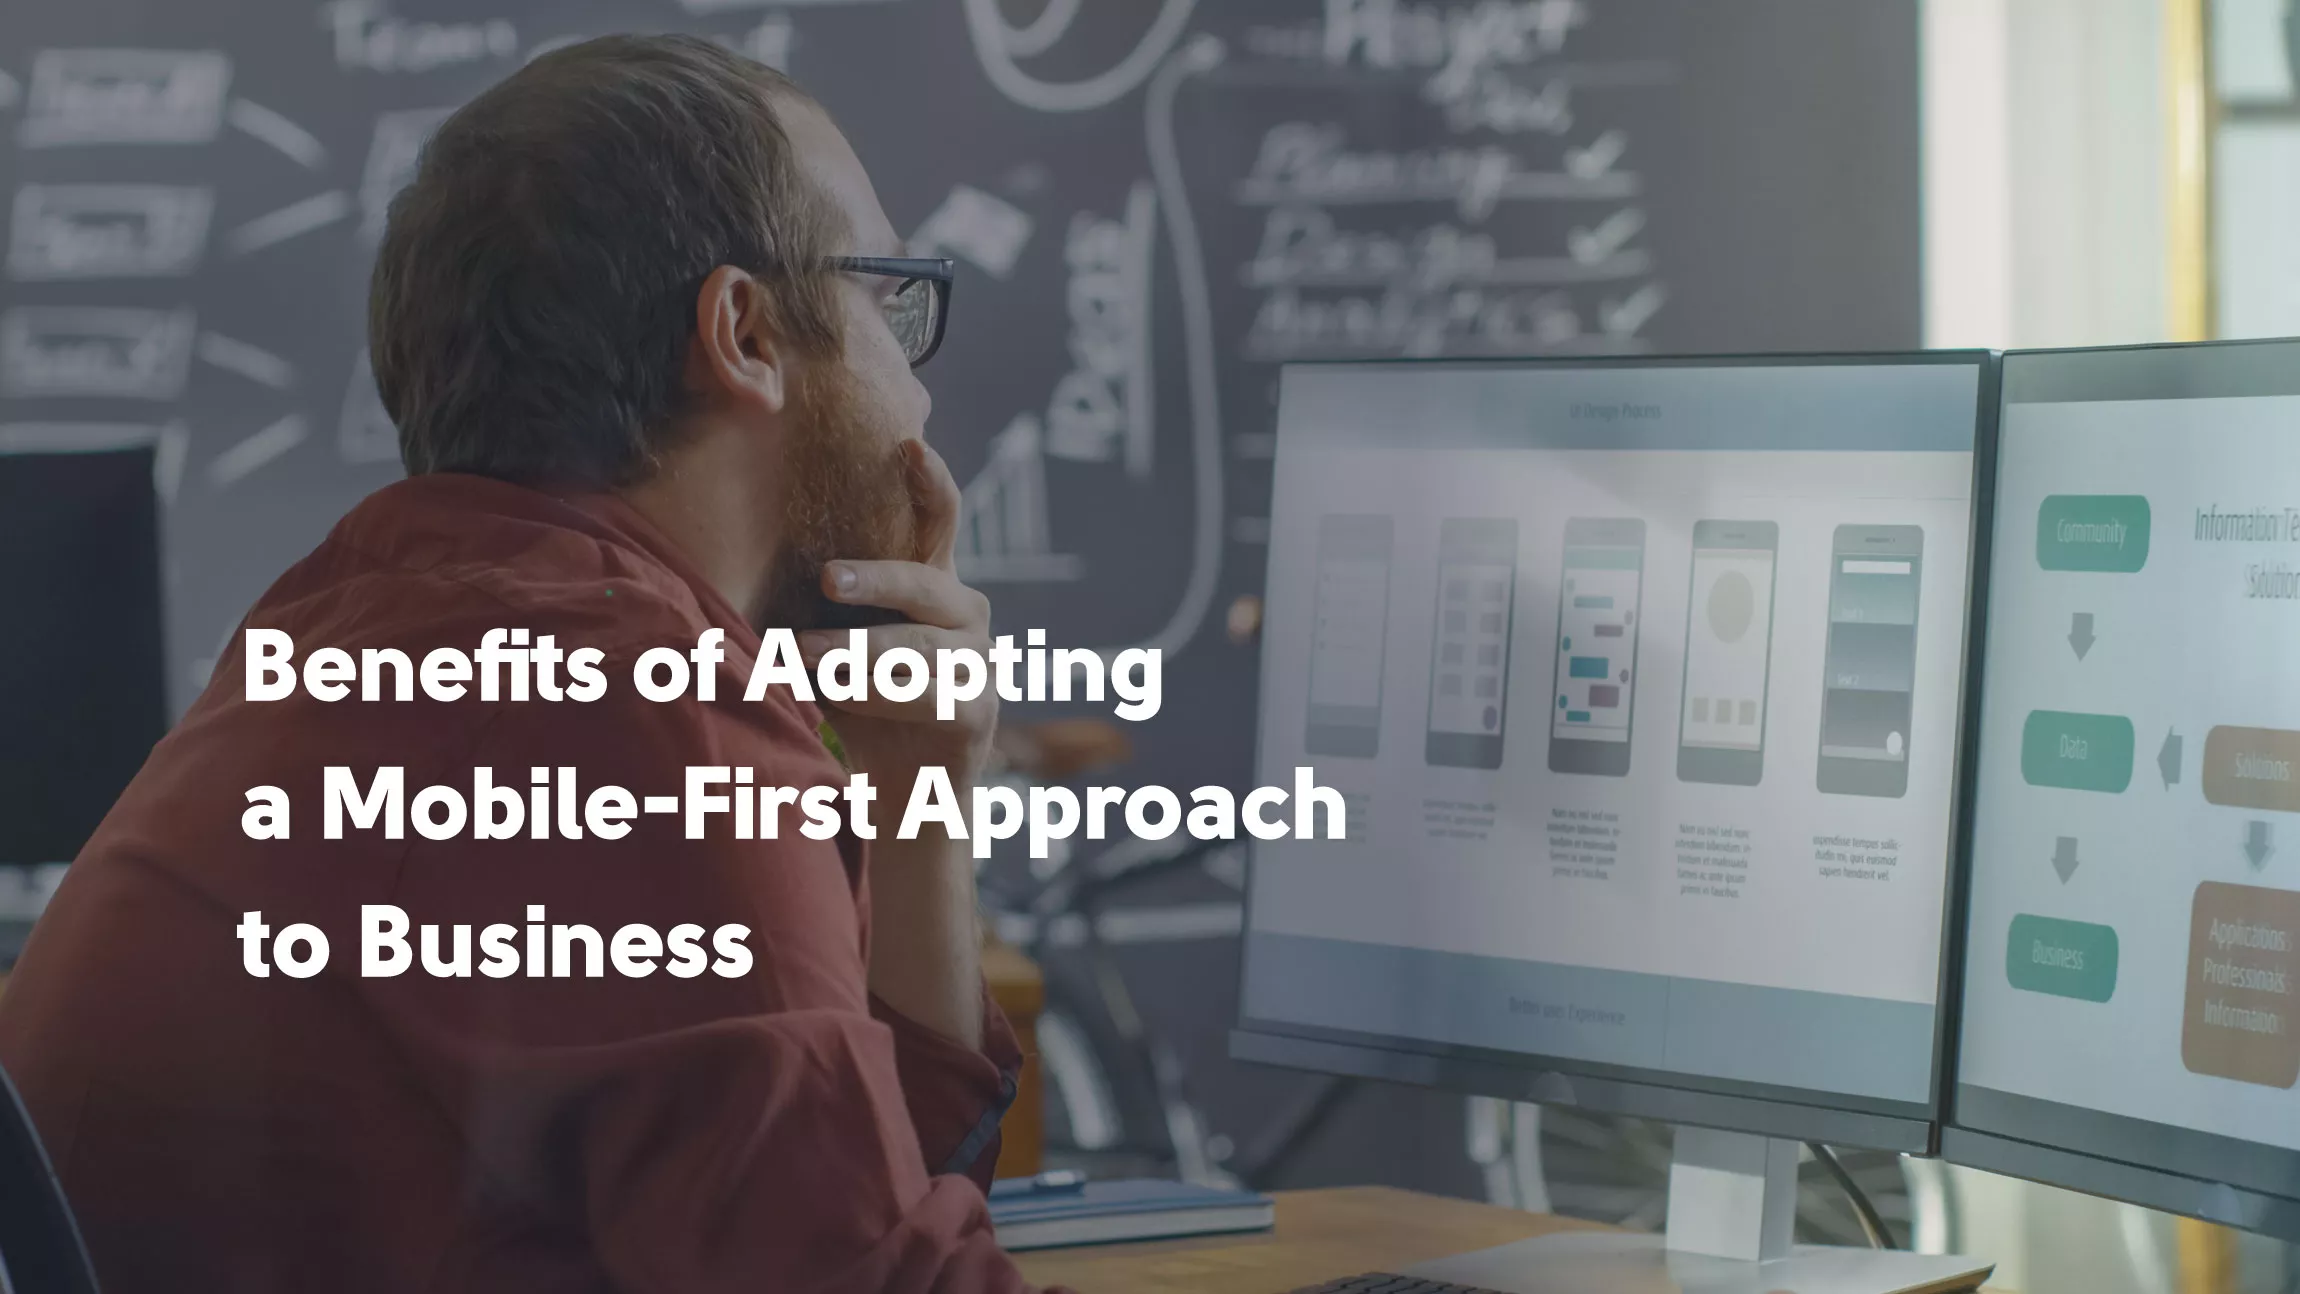 Adopting a Mobile-First Approach